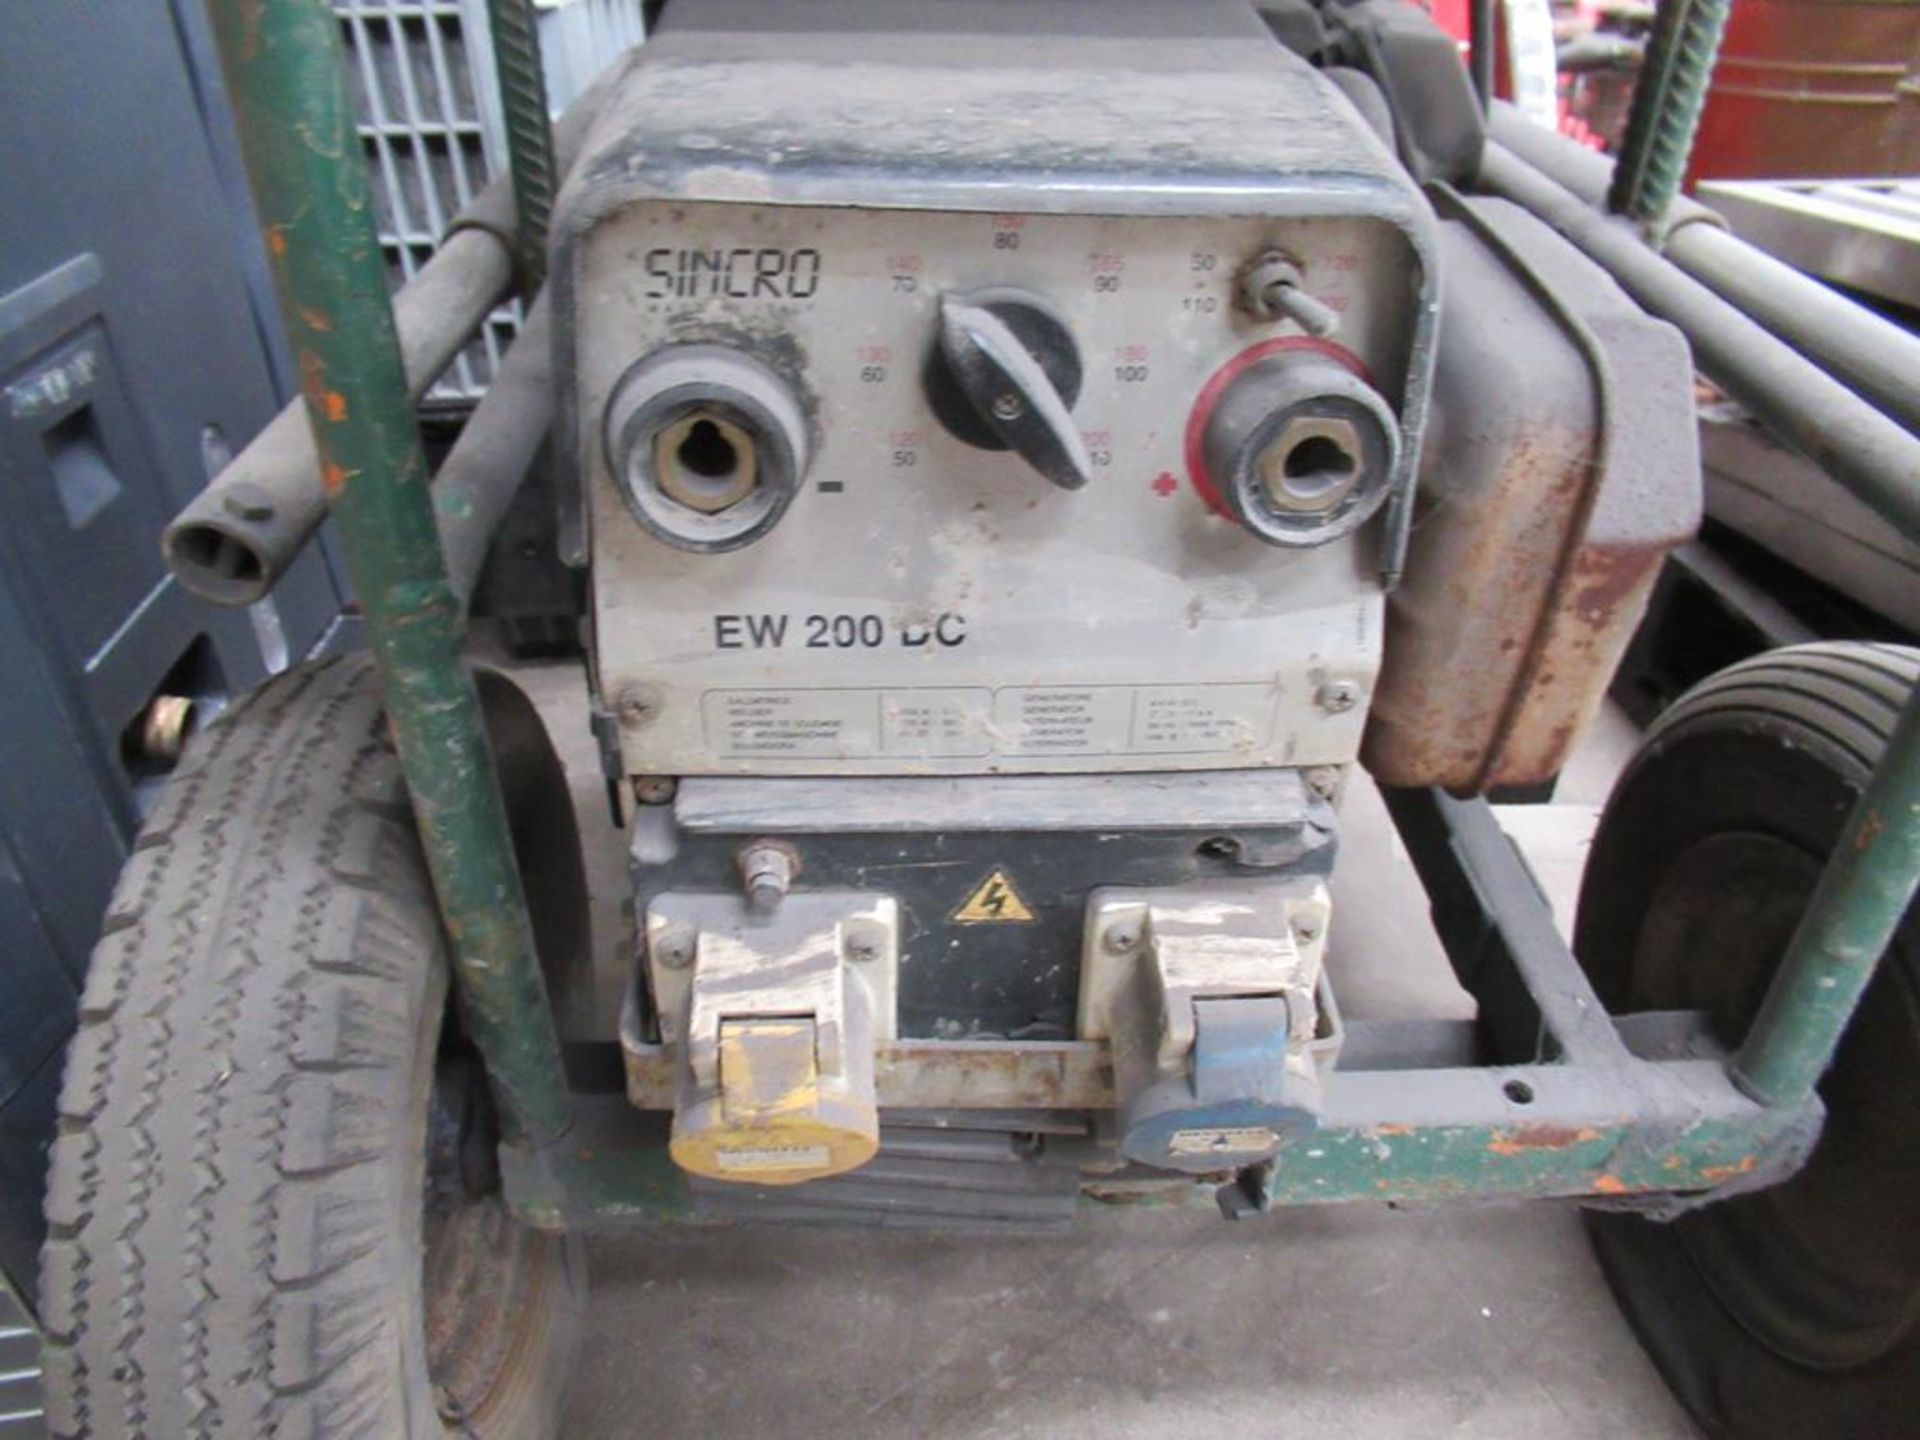 Portable generator and welding set with Sincro EW 200 DC Panel - Image 2 of 2